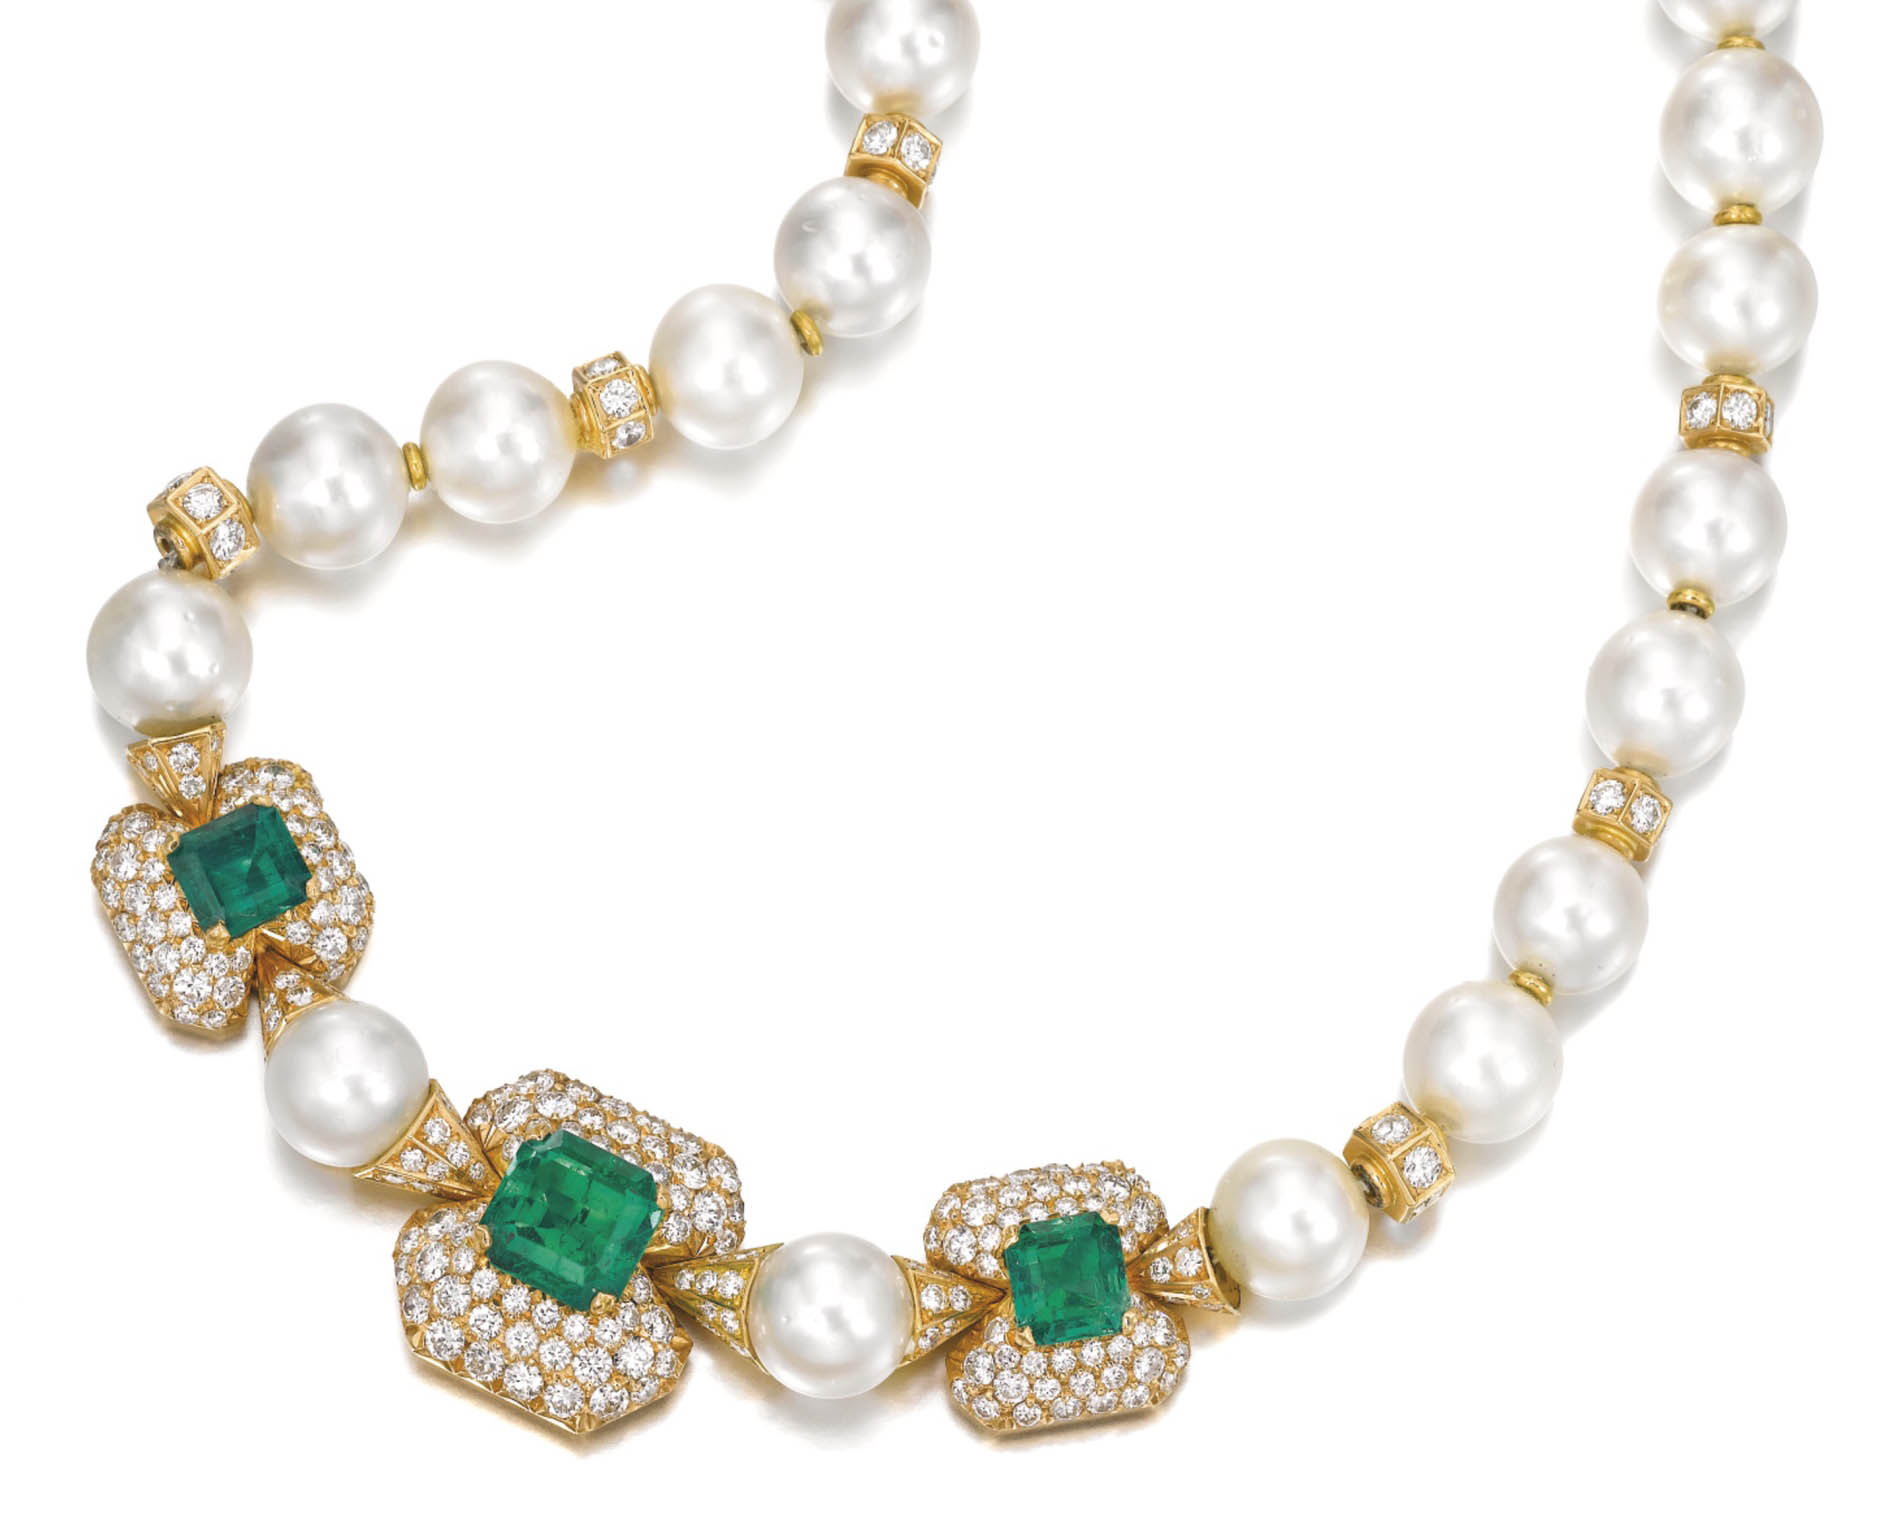 LOT 180 - EMERALD, CULTURED PEARL AND DIAMOND NECKLACE 